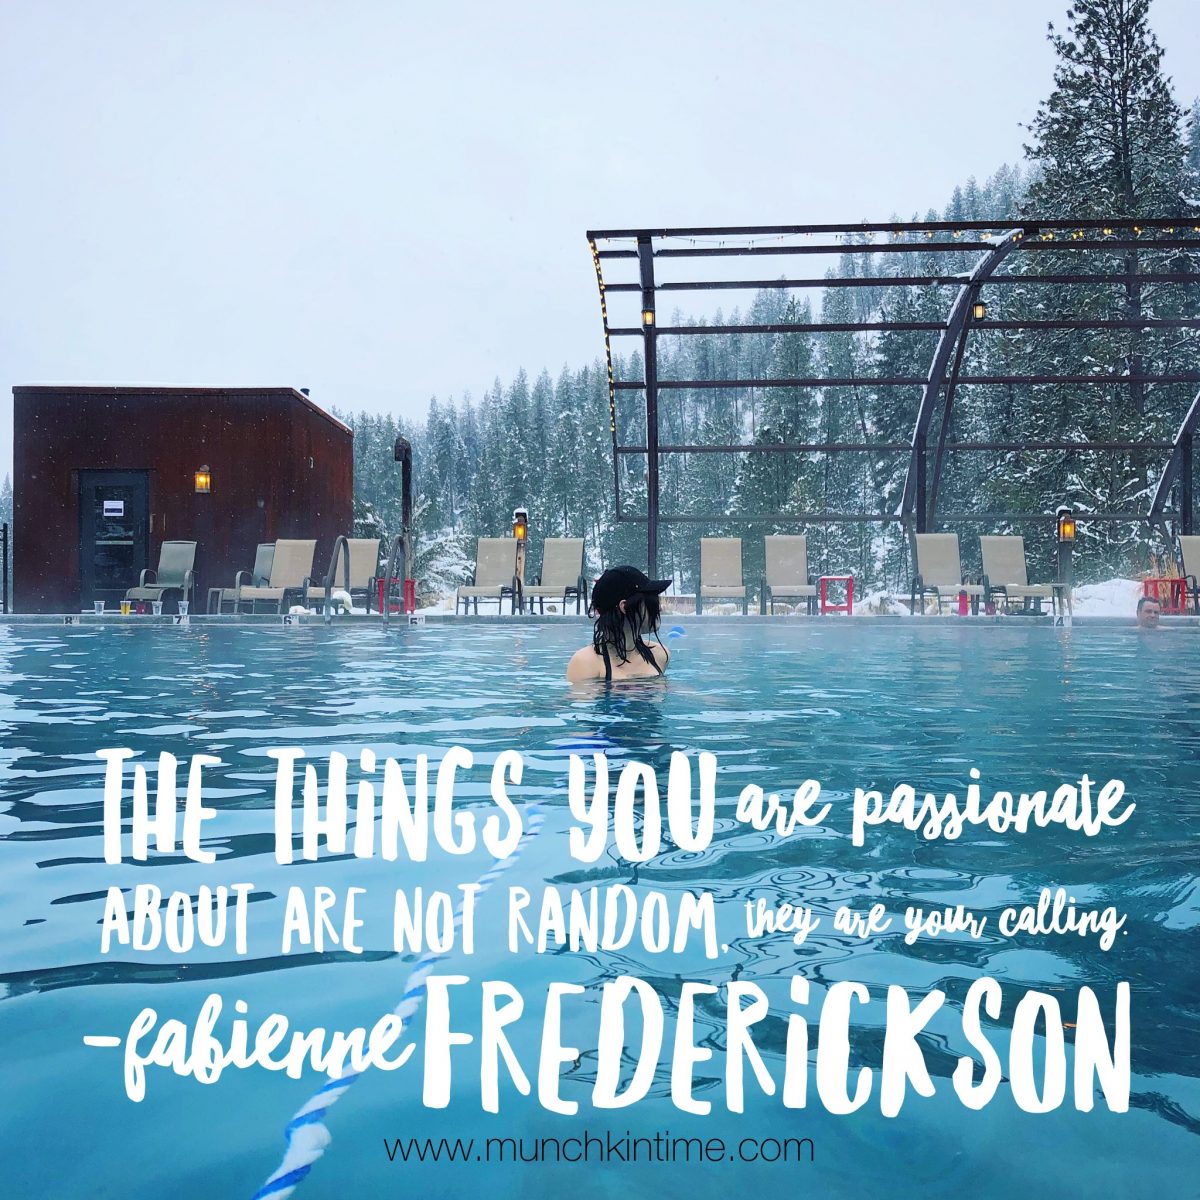 Fabienne Fredrickson — ‘The things you are passionate about are not random, they are your calling.’